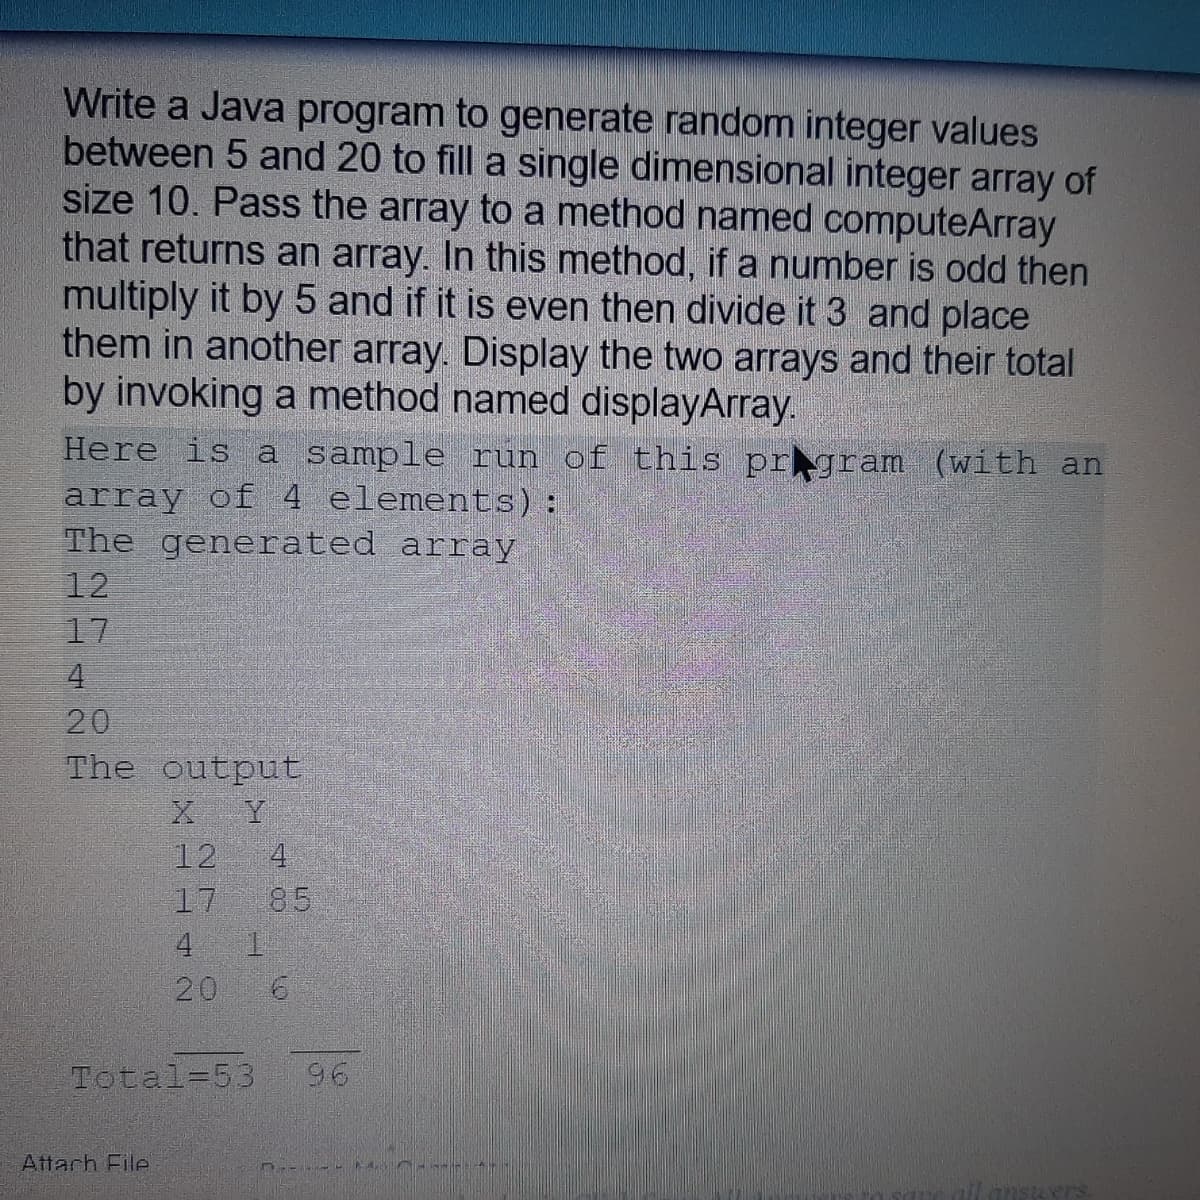 Write a Java program to generate random integer values
between 5 and 20 to fill a single dimensional integer array of
size 10. Pass the array to a method named computeArray
that returns an array. In this method, if a number is odd then
multiply it by 5 and if it is even then divide it 3 and place
them in another array. Display the two arrays and their total
by invoking a method named displayArray.
Here is a sample run of this prgram (with an
array of 4 elements) :
The generated array
12
17
4.
20
The output
X Y
4
85
12
17
4
20
Total=53
96
Attach File
ansuers
